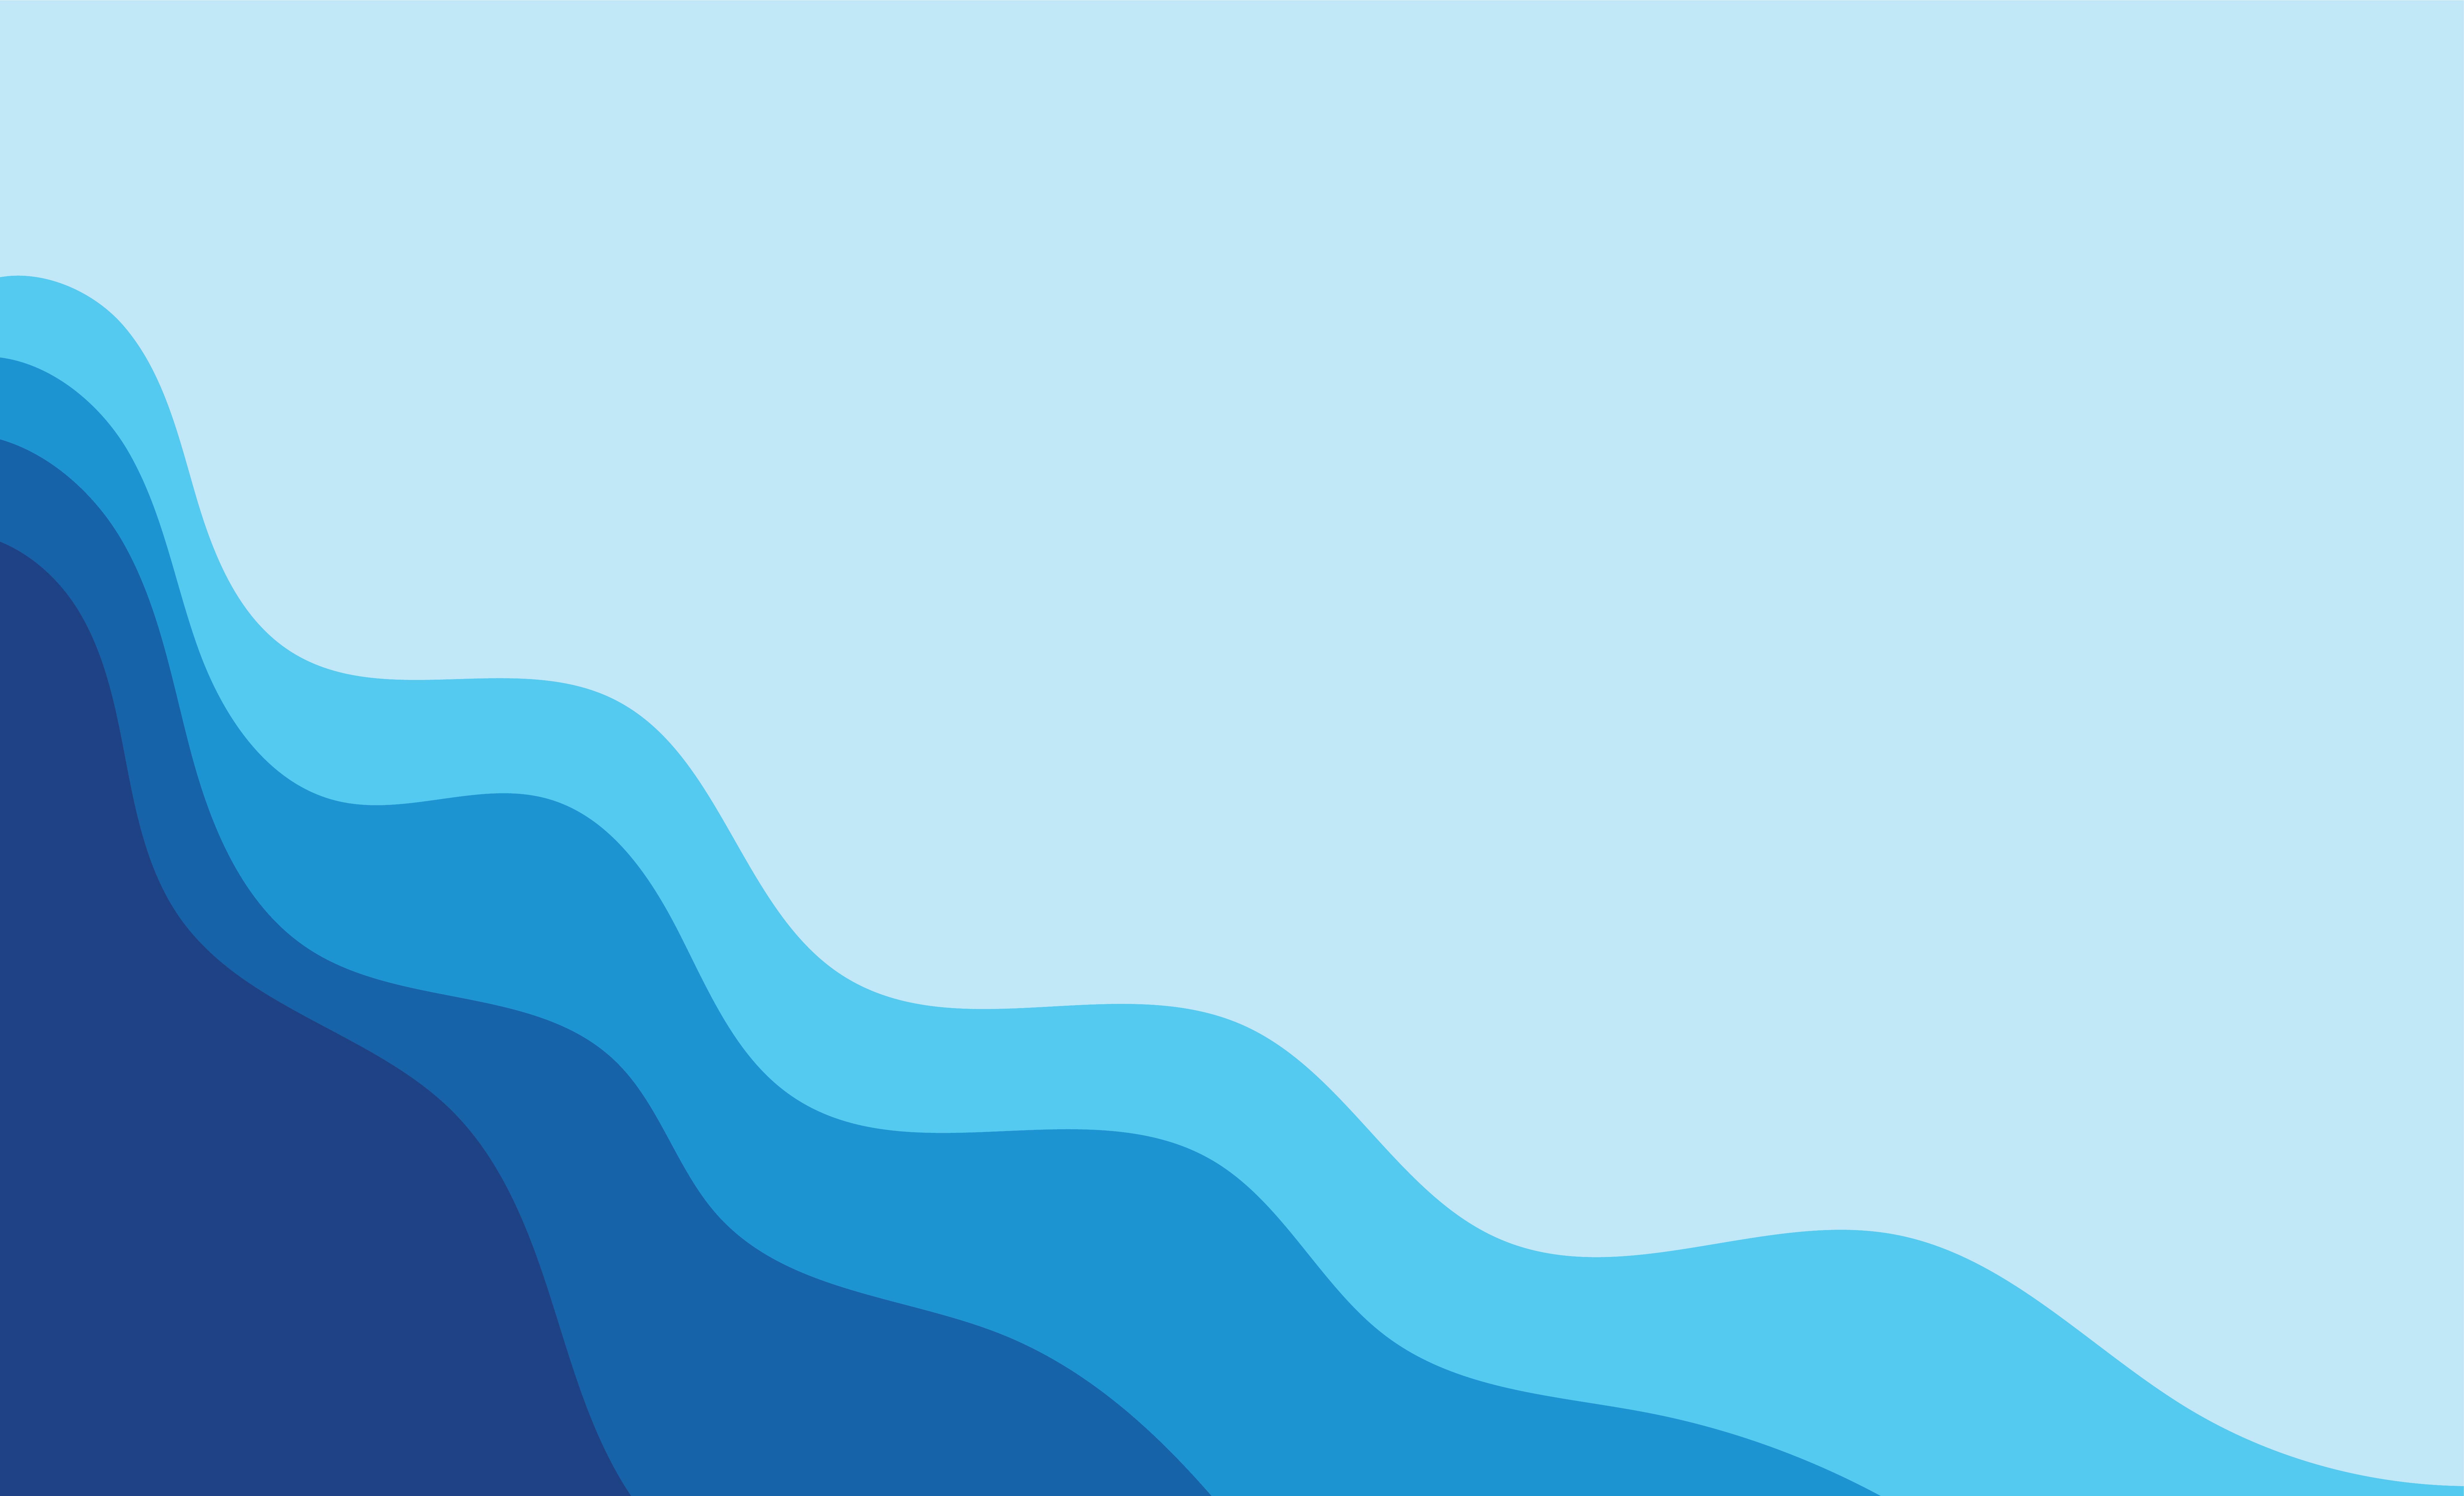 Wave blue background vector wallpaper cover image.